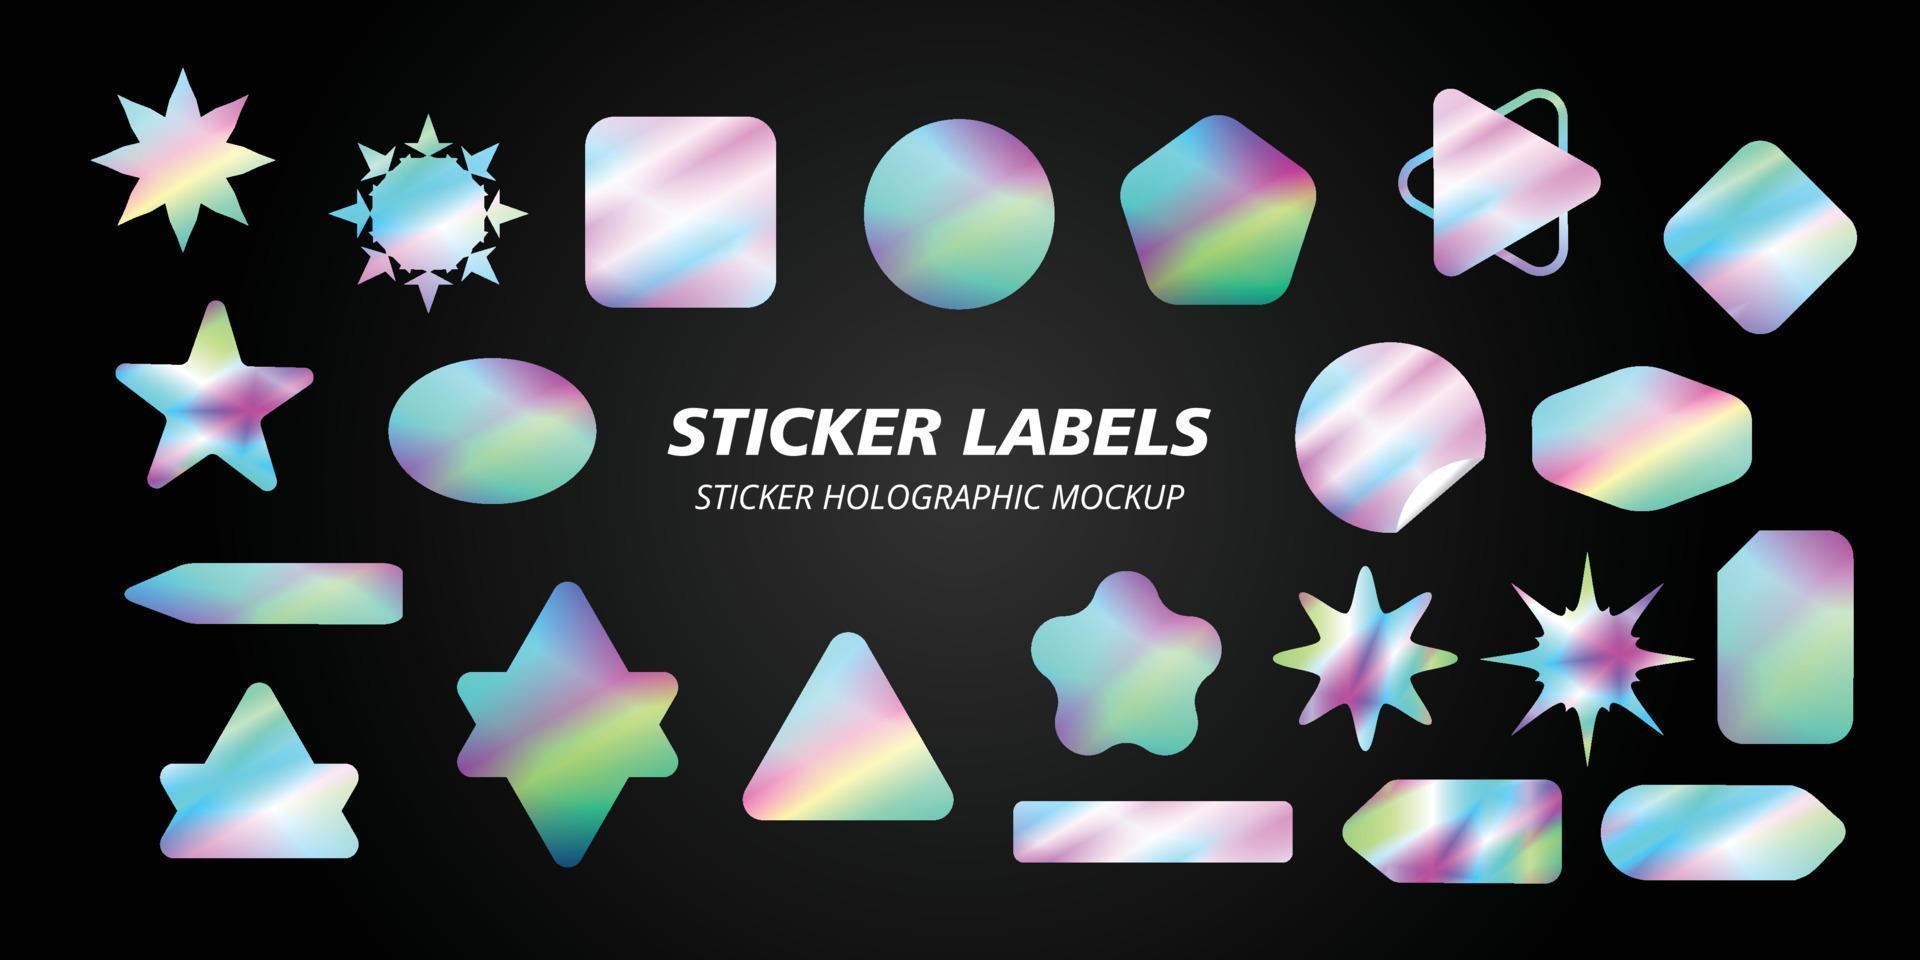 sticker holographic . hologram label with various shapes. Sticker shapes for design mockups. holographic sticker for preview tags, labels, vector illustration